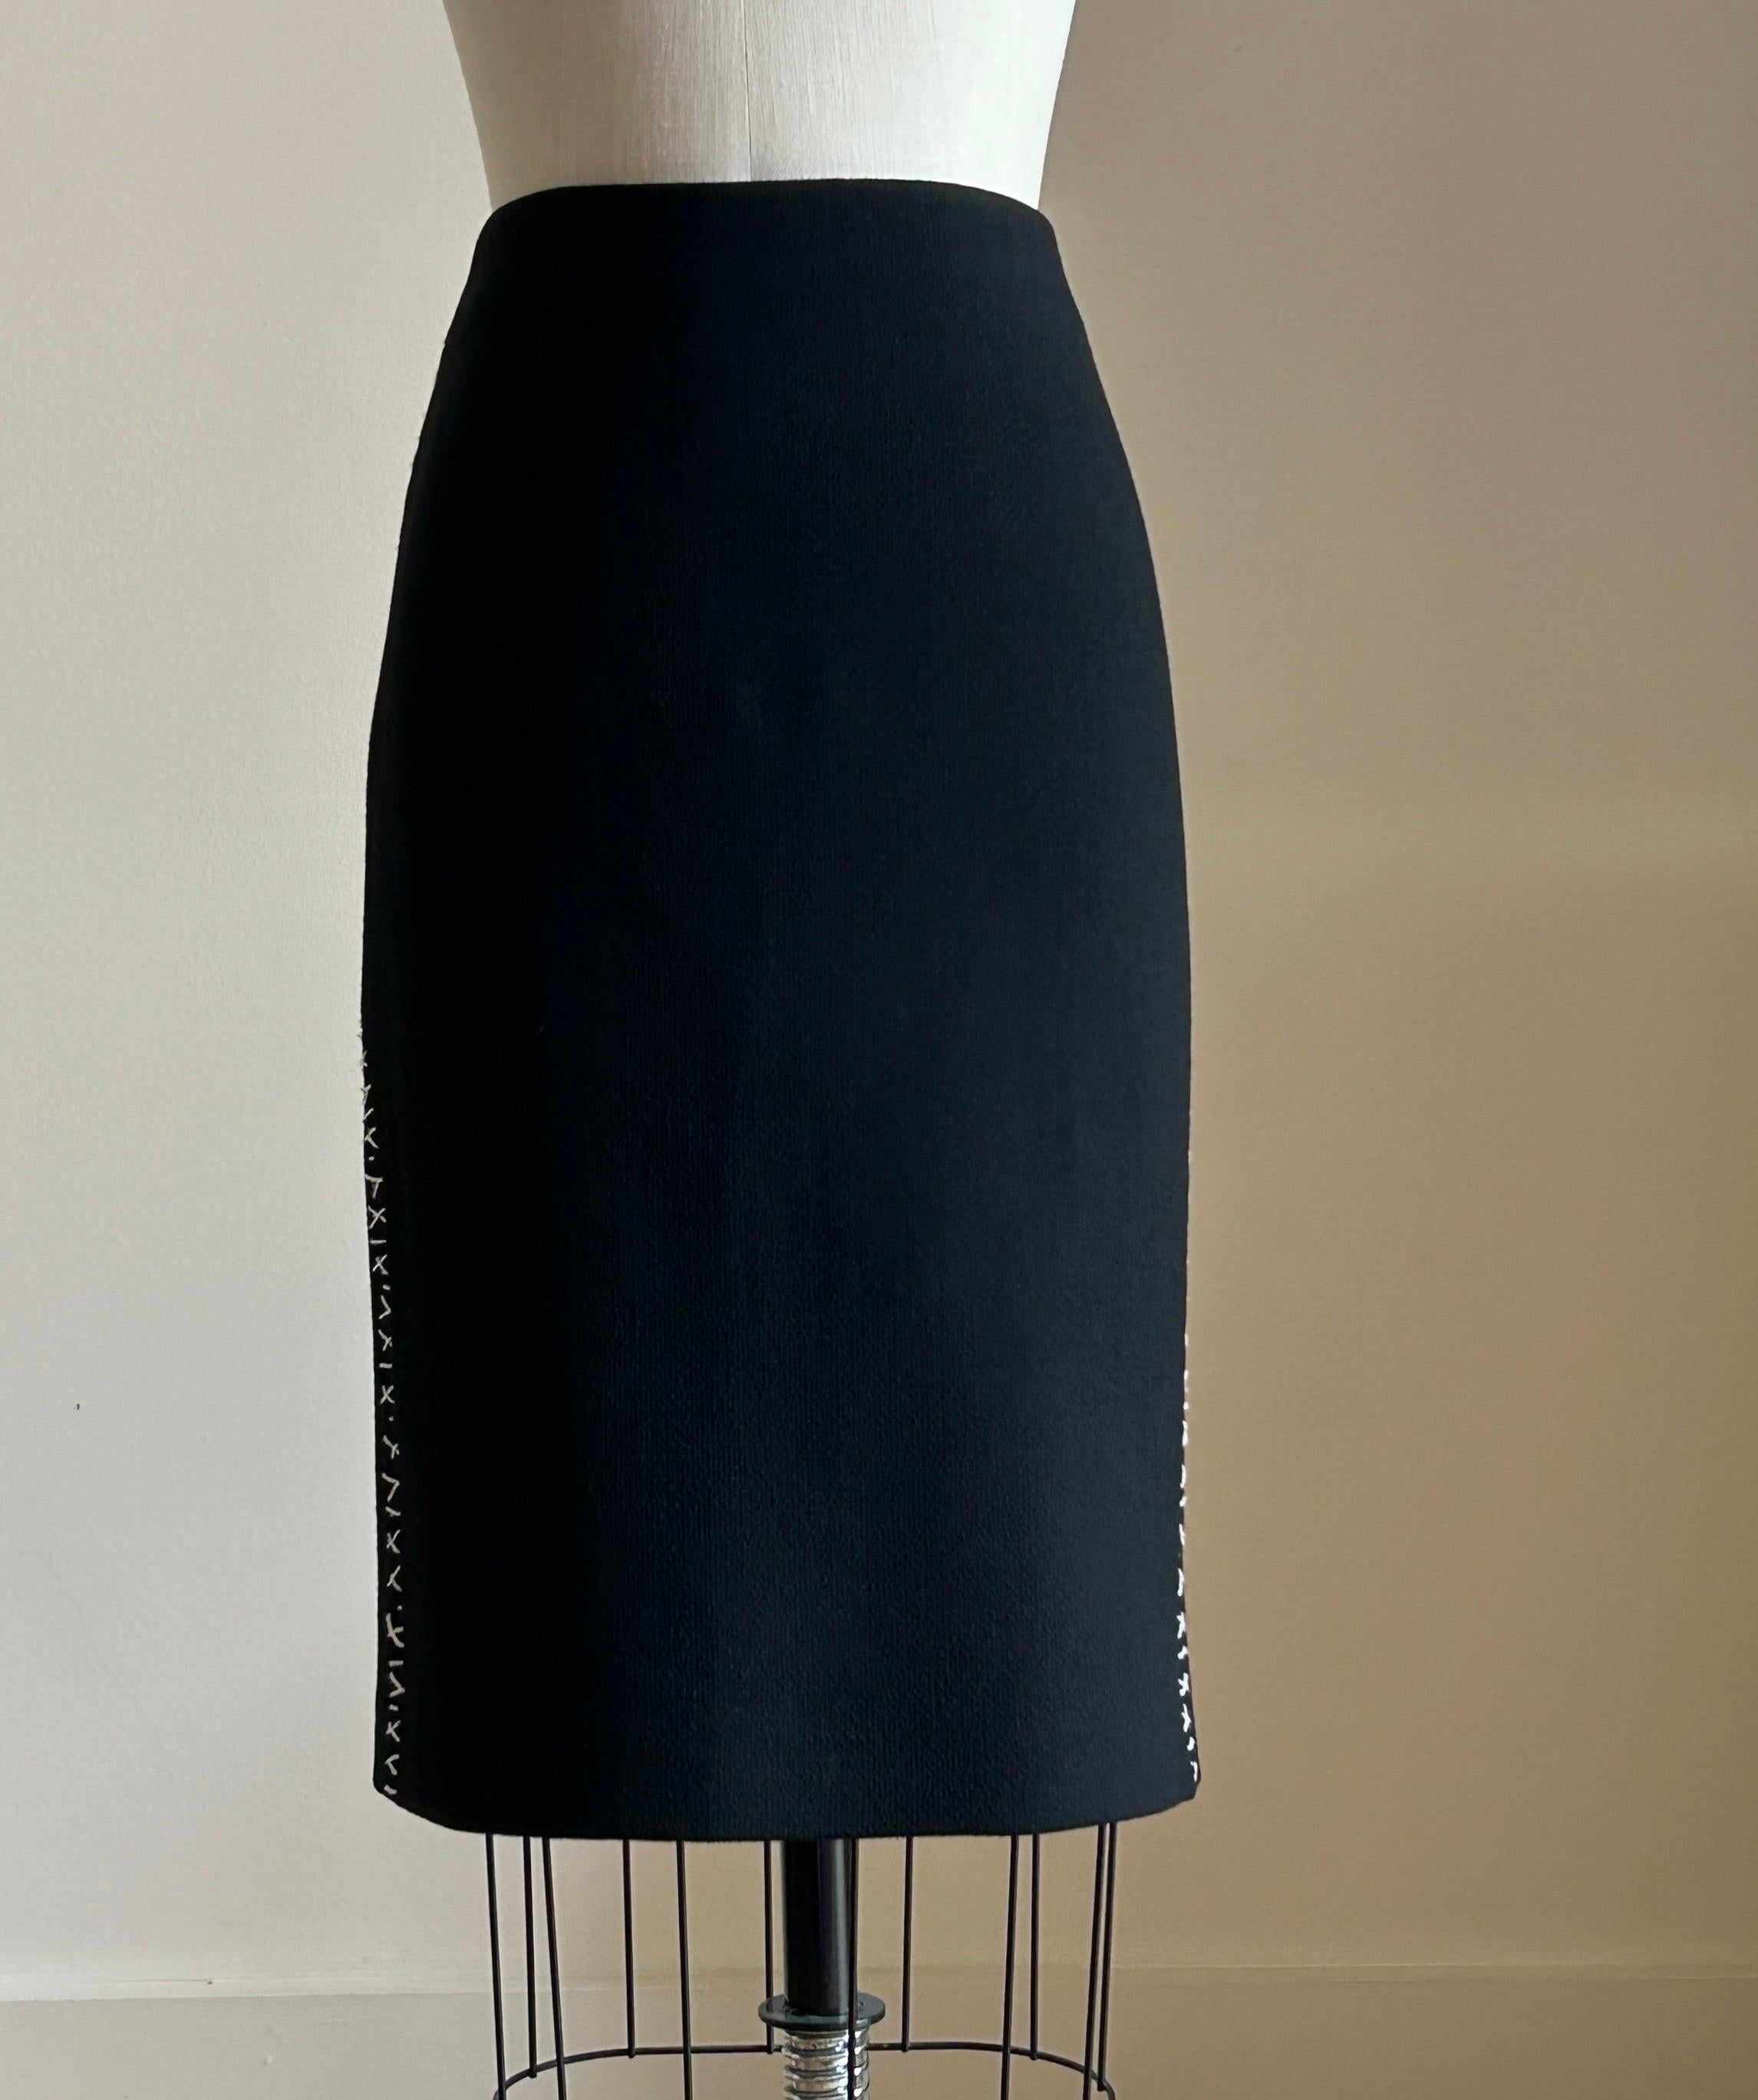 Alexander McQueen 2004 black pencil skirt with white accent stitches at back and sides. Zip and hook and eye at back waist, slit at back center. (Main photo is side view.)

100% wool.
Fully lined.

Made in Italy.

Size Italian 40, approximate US 4.